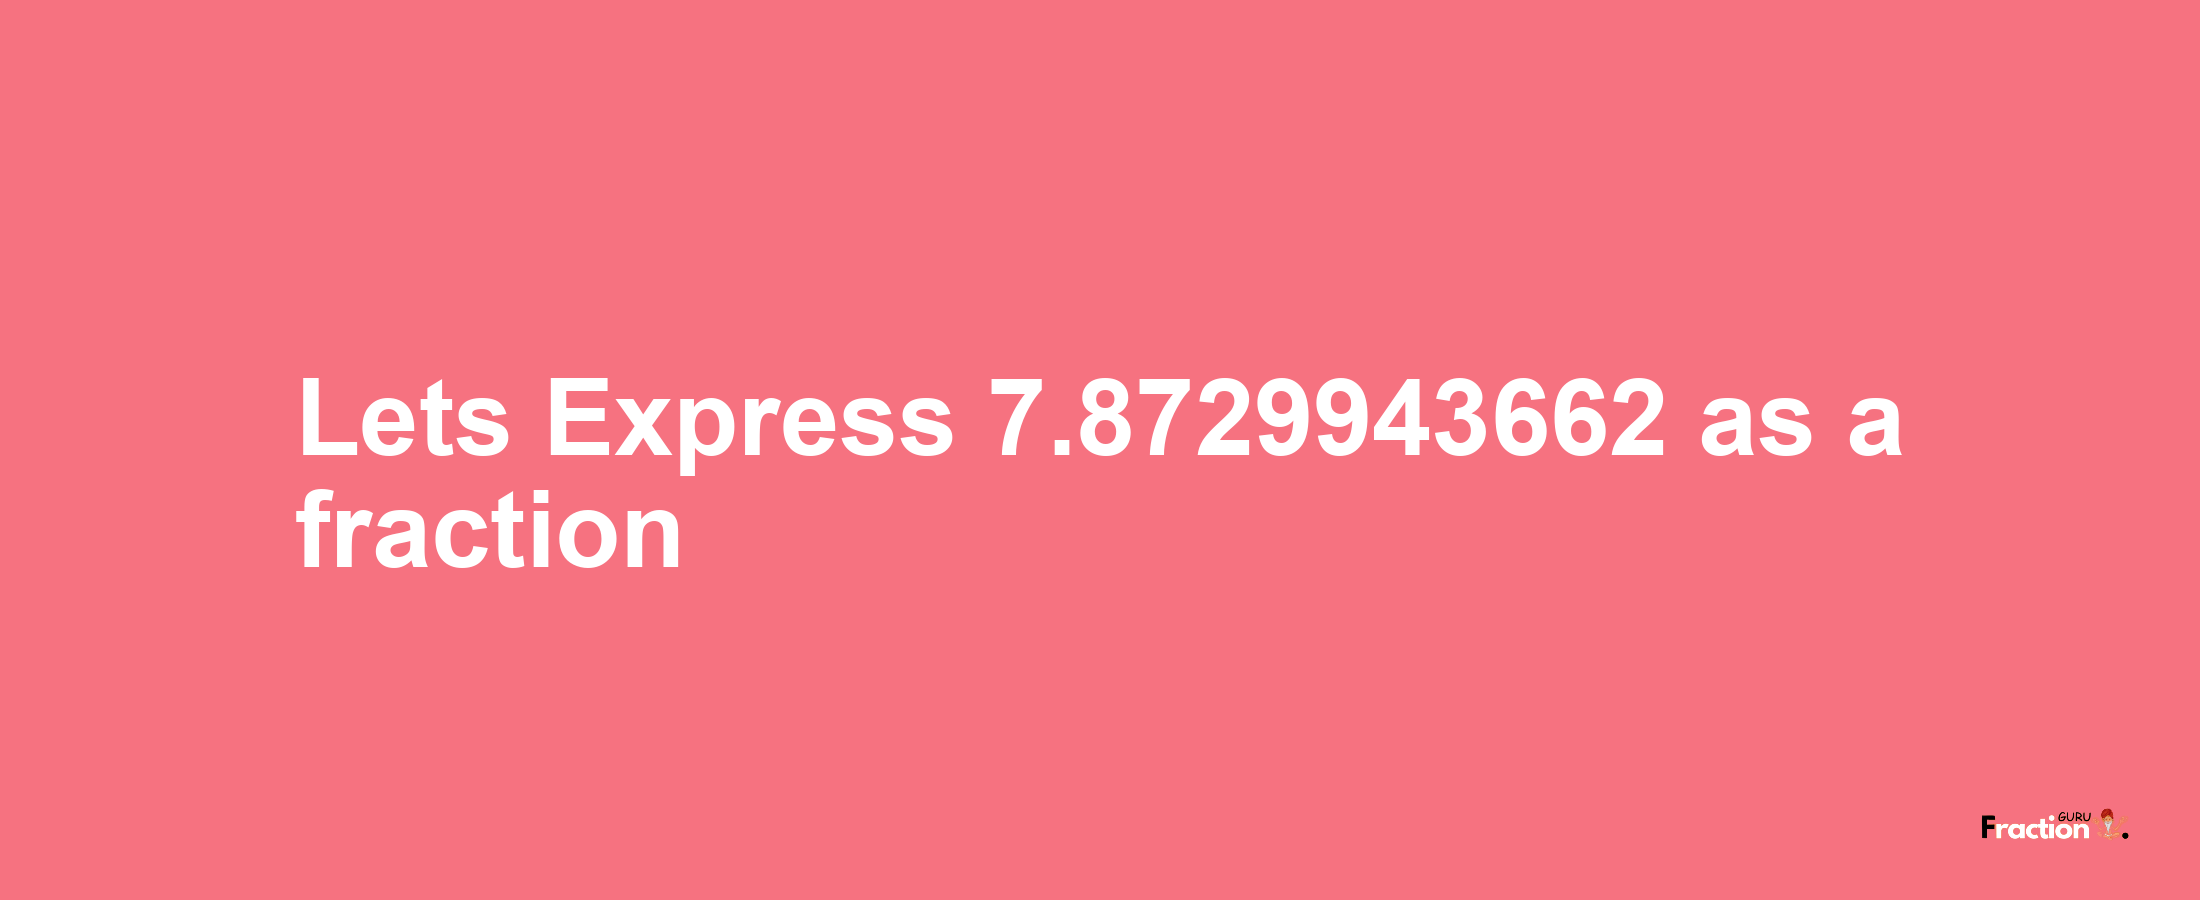 Lets Express 7.8729943662 as afraction